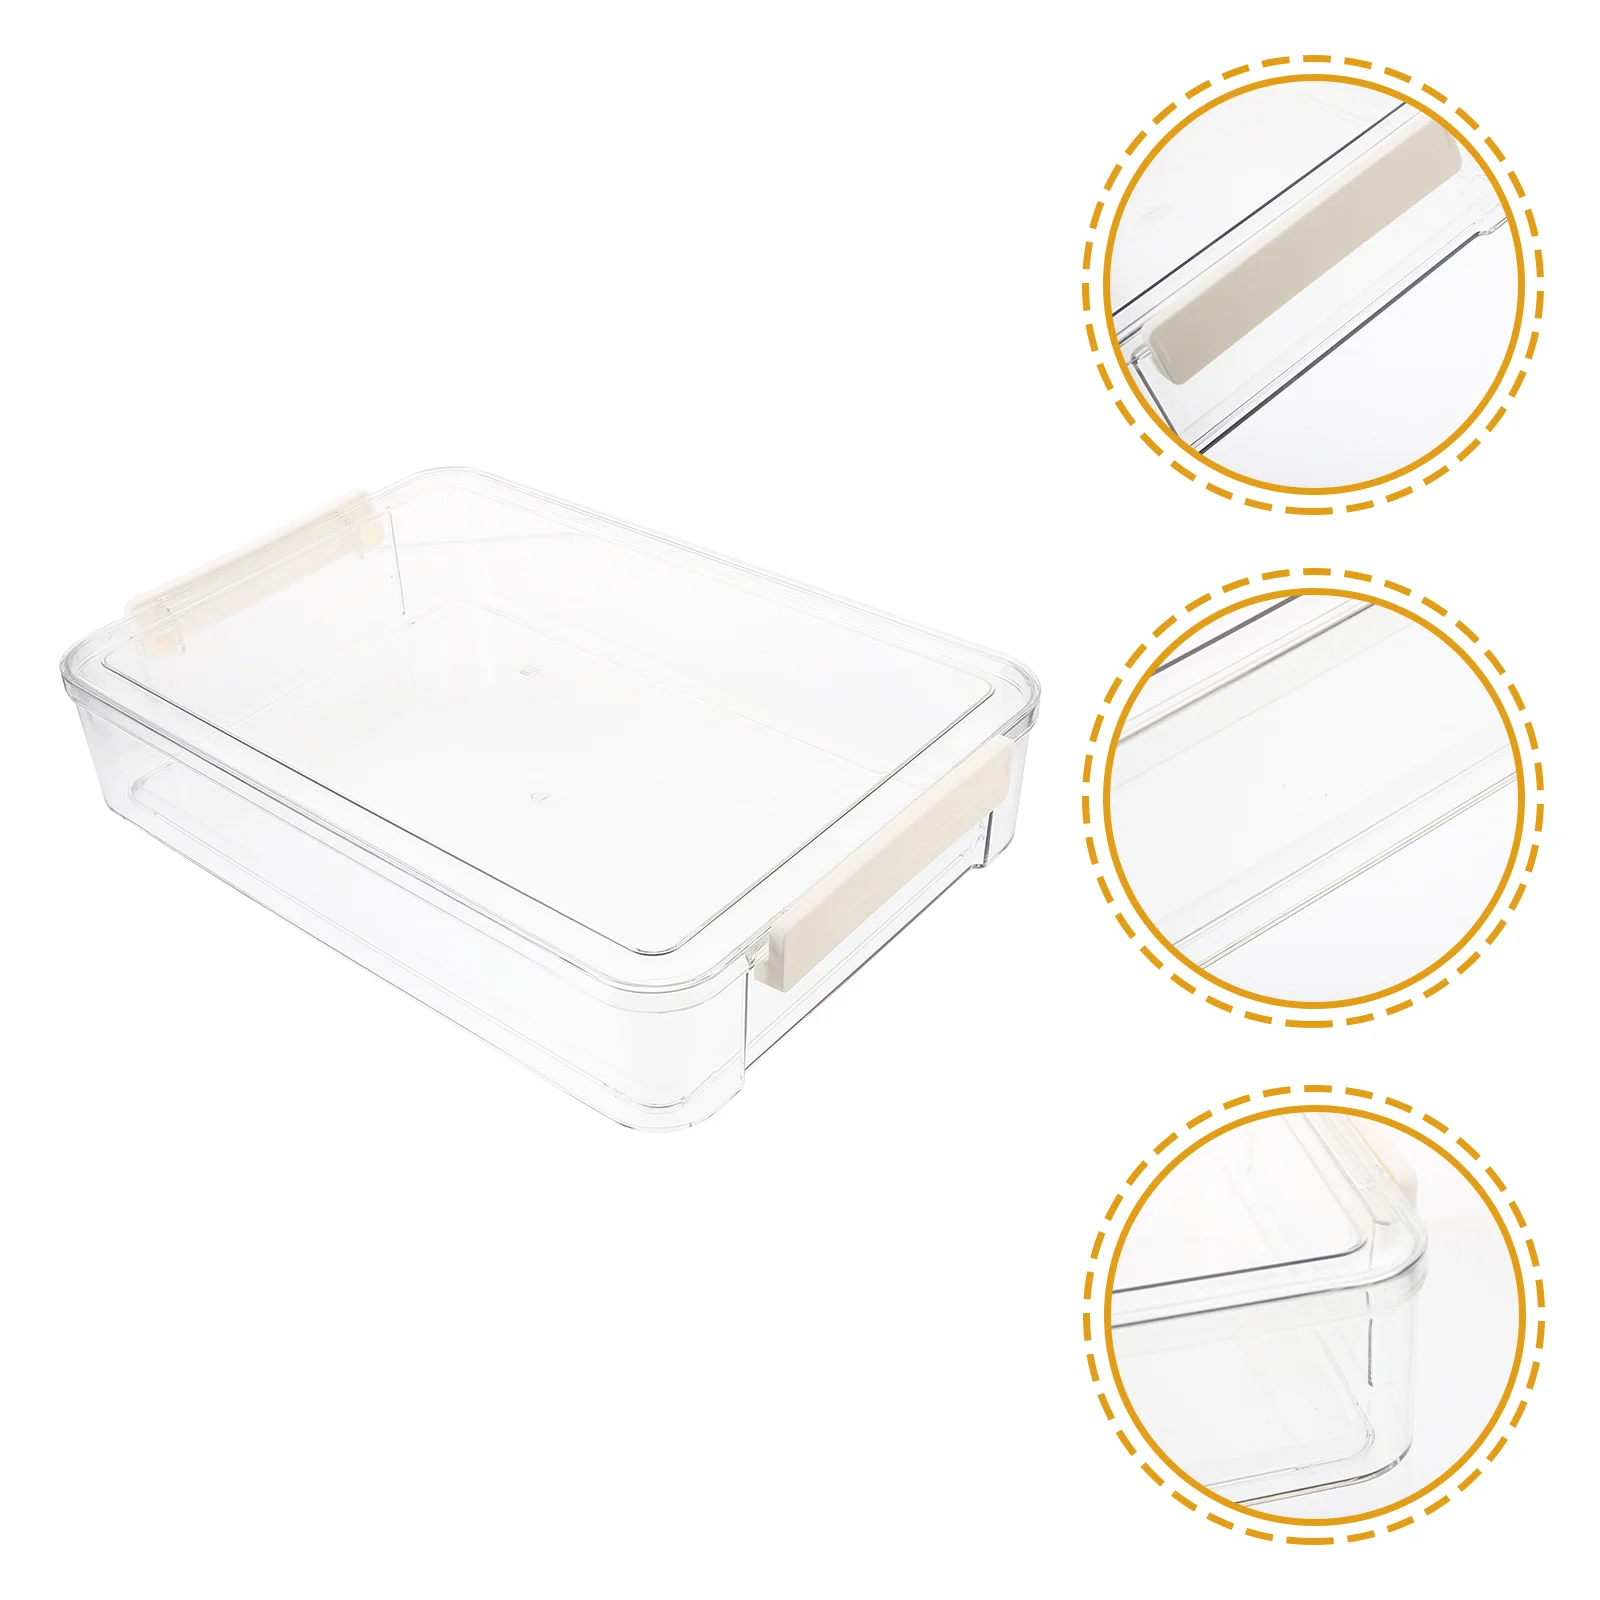 

Postcard Clear Plastic Container Lid Case Containers Document Organizer Storage Lids Bins Craft Organizing Totes